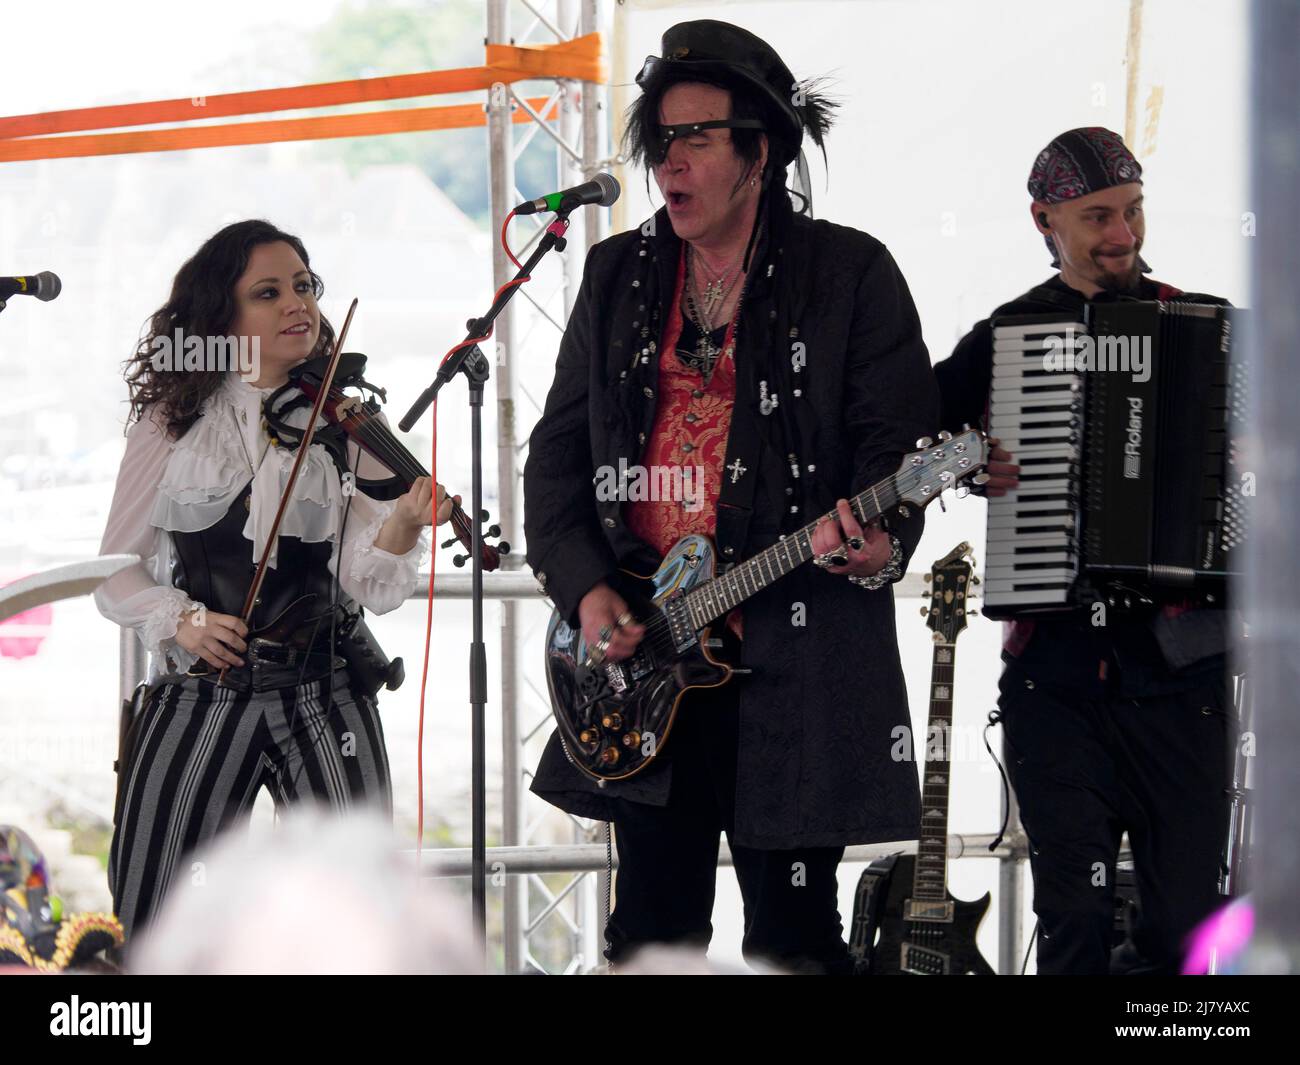 The Filthy Spectacula band playing at the Brixham Pirate Festival 2022, Devon, UK Stock Photo